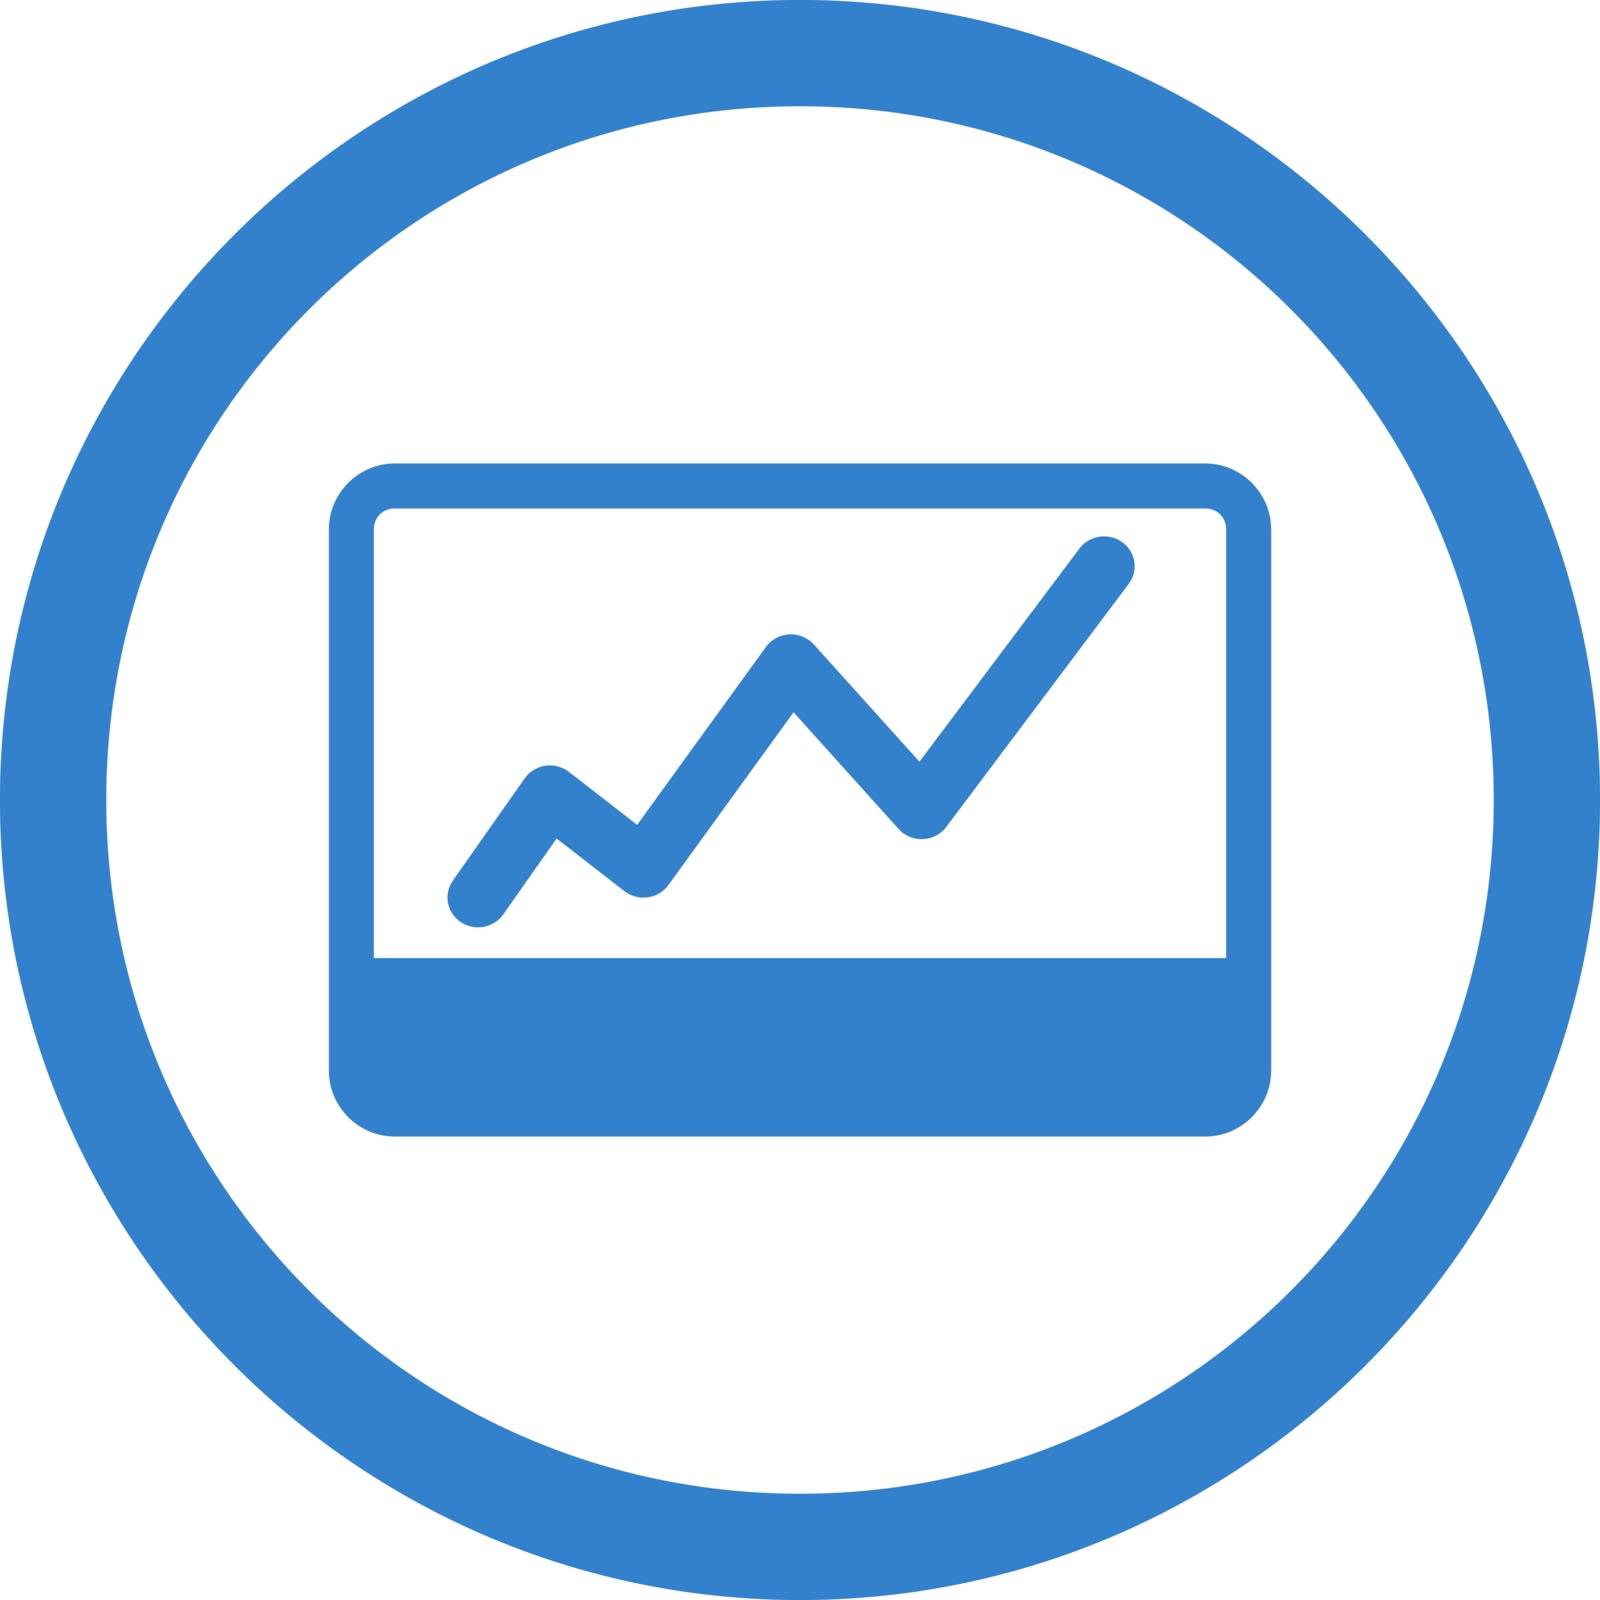 Stock Market vector icon. This flat rounded symbol uses cobalt color and isolated on a white background.